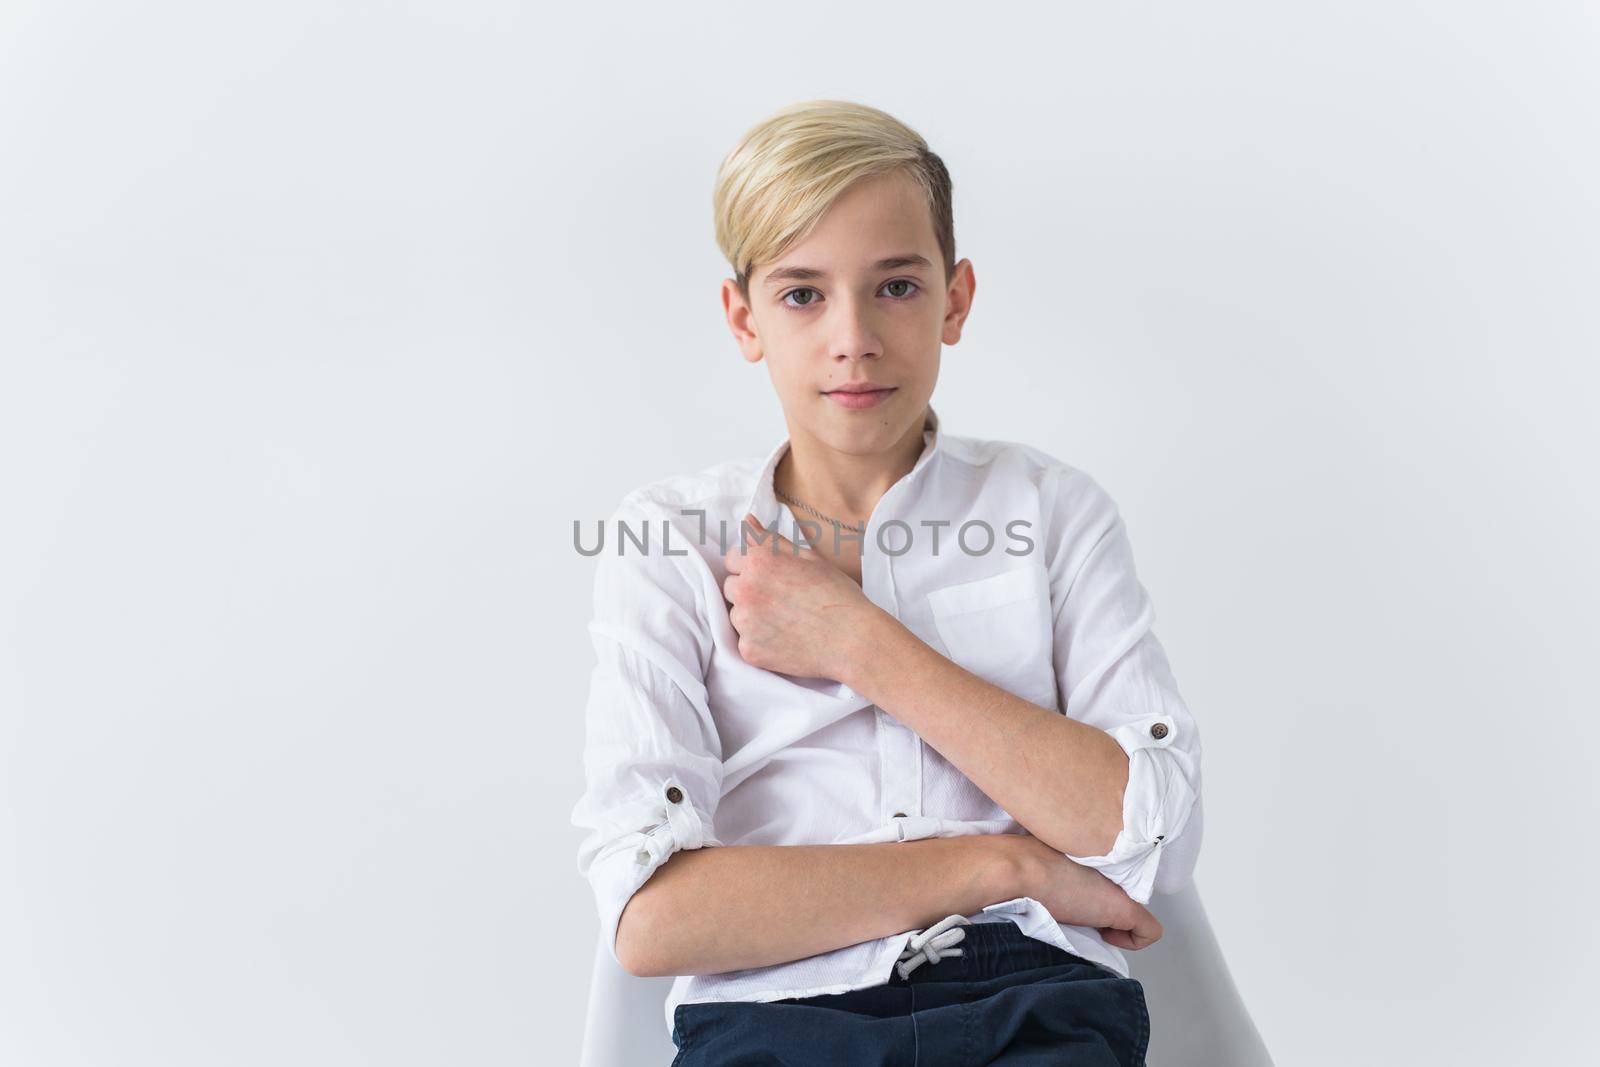 Solitude, loneliness and boredom concept - Bored teen student sitting in a school chair isolated on white background by Satura86